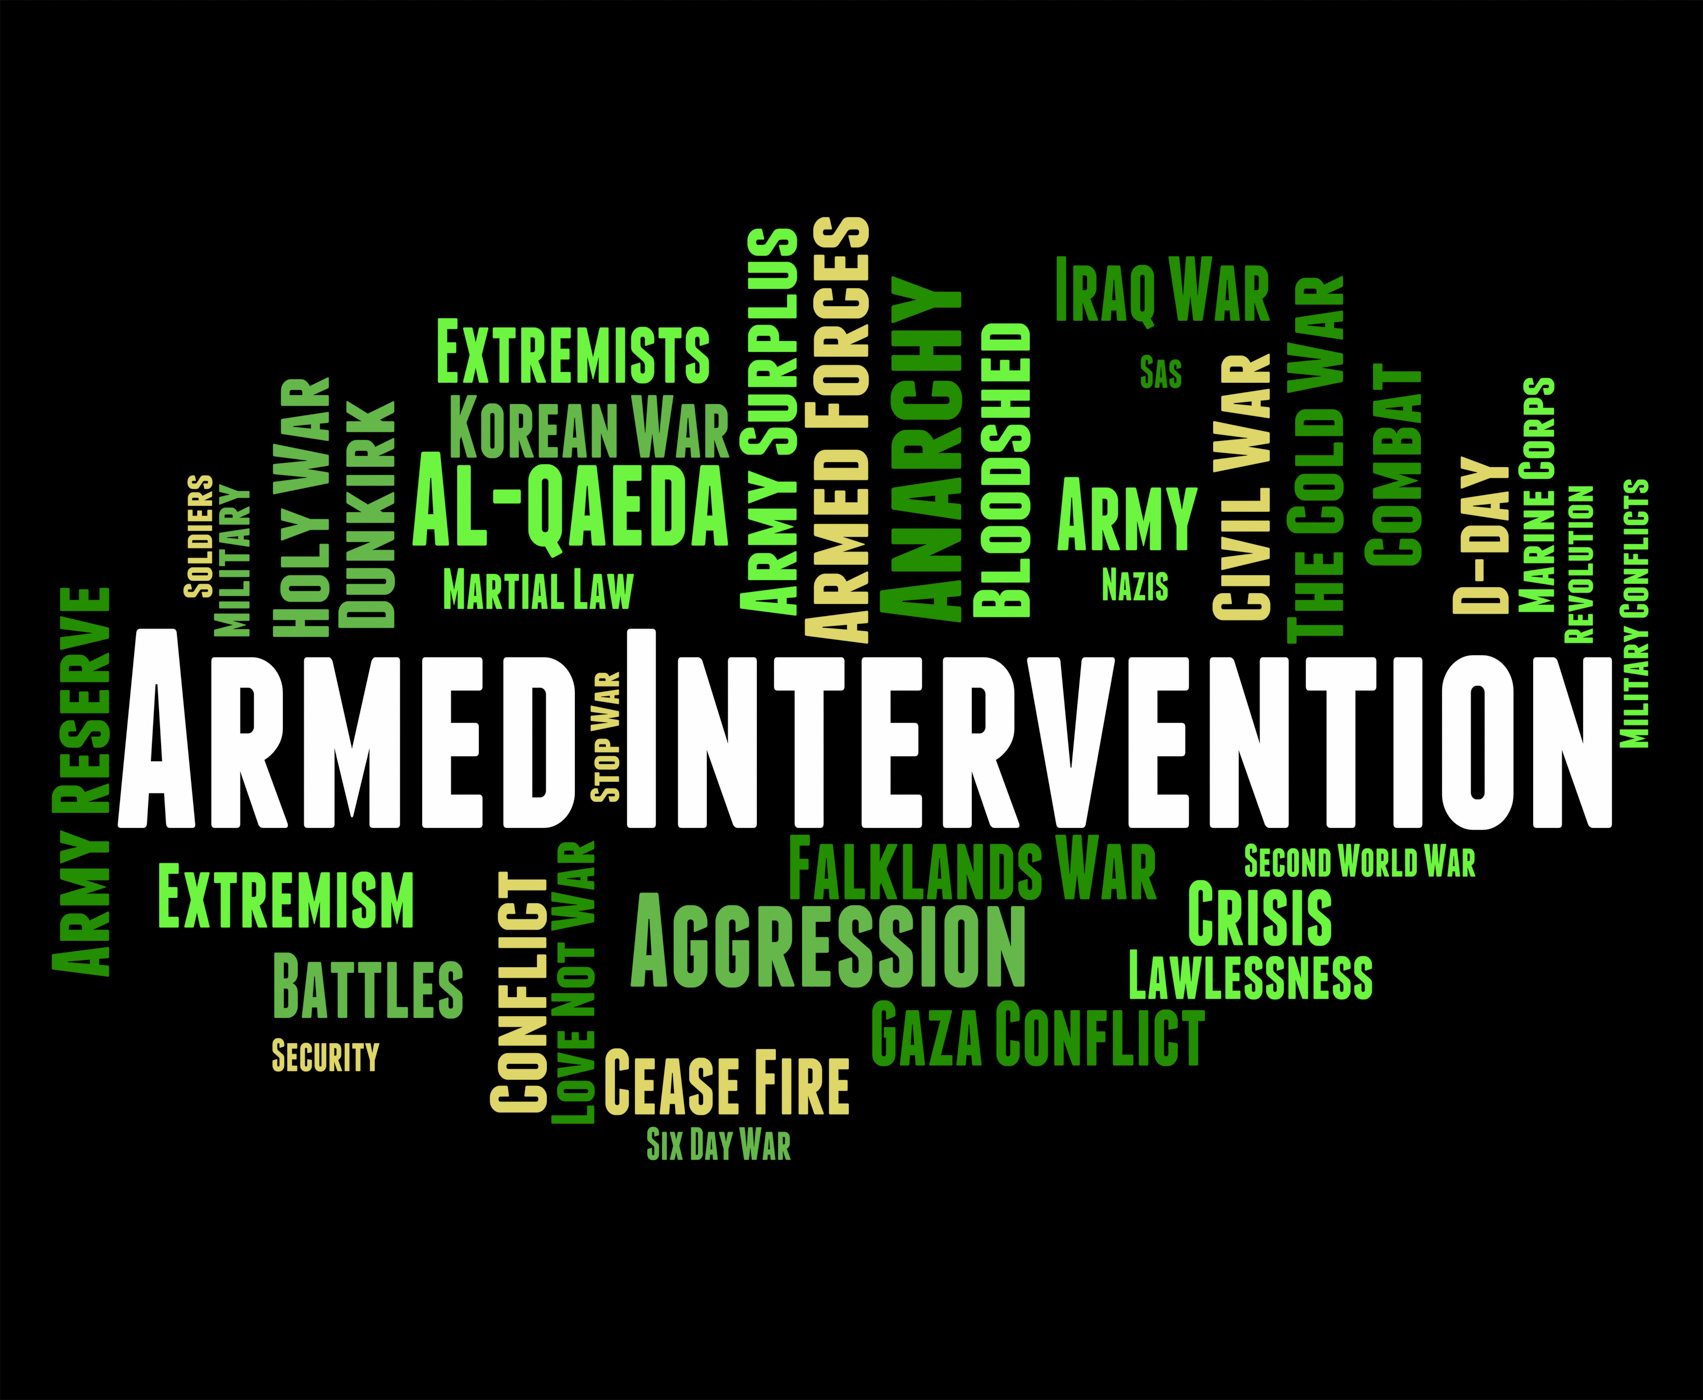 Armed intervention represents military action and arms photo